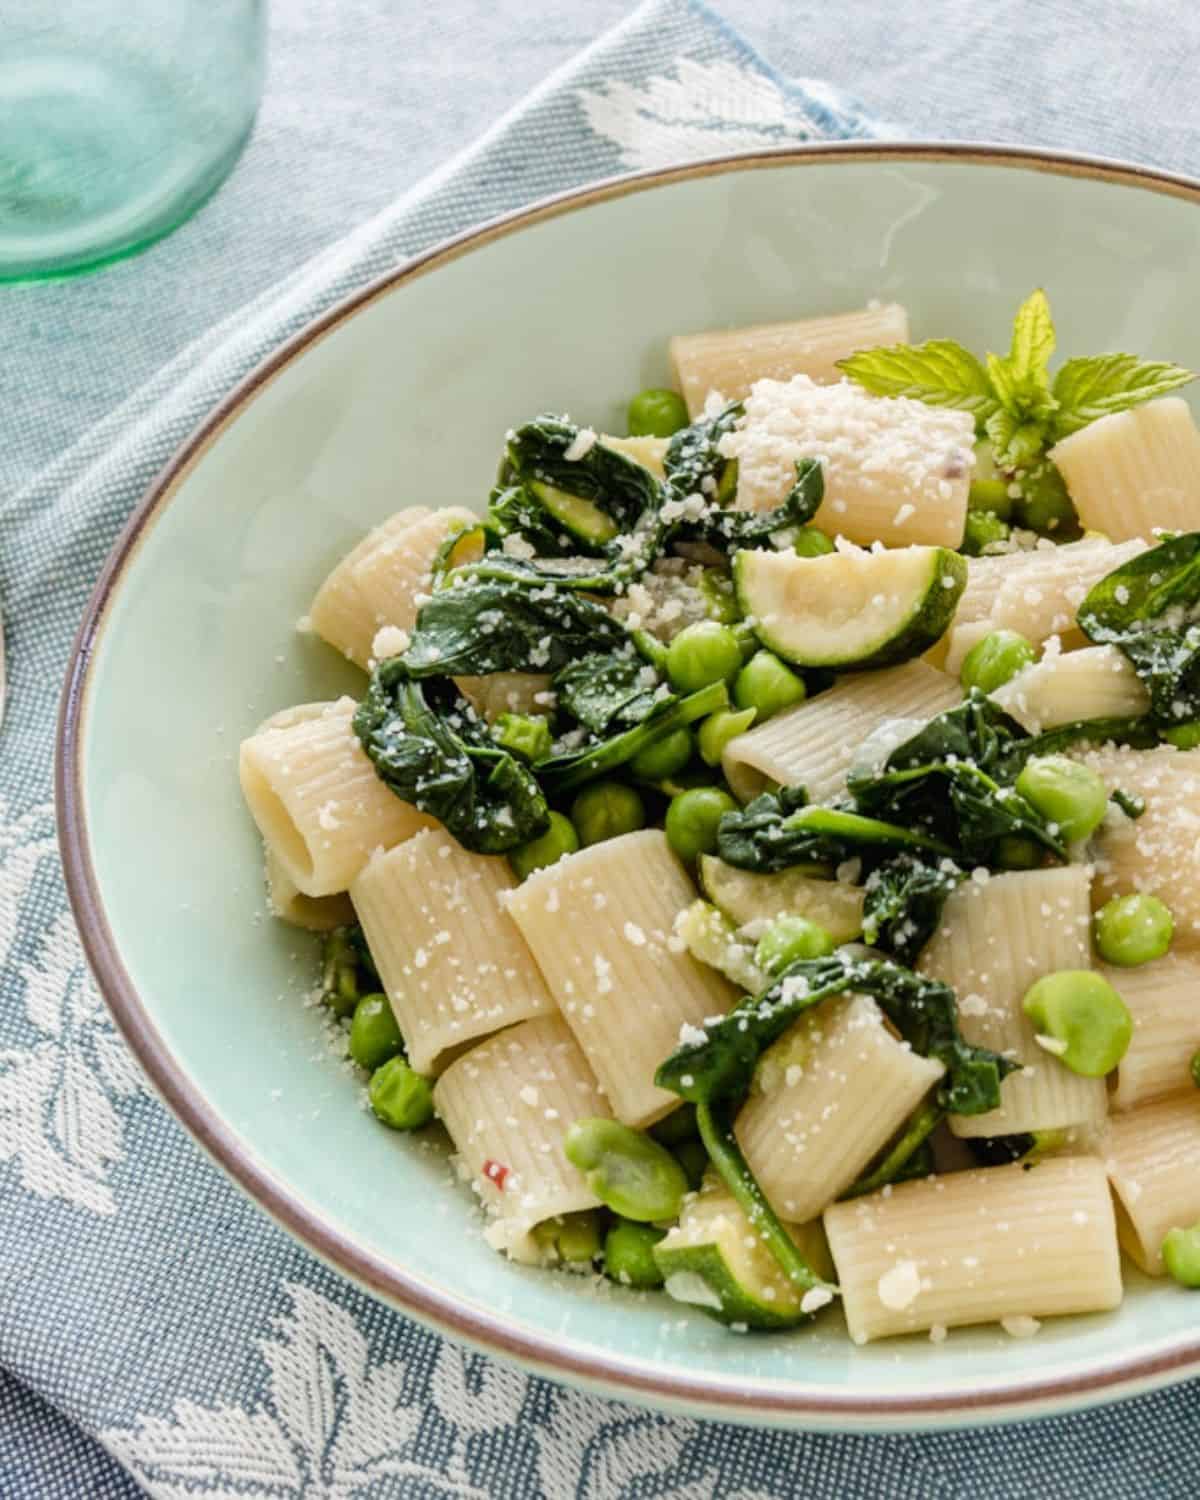 A close-up of Green Vegetable Pasta in a light green plate on blue linen. The dish shows spinach, peas and zucchini